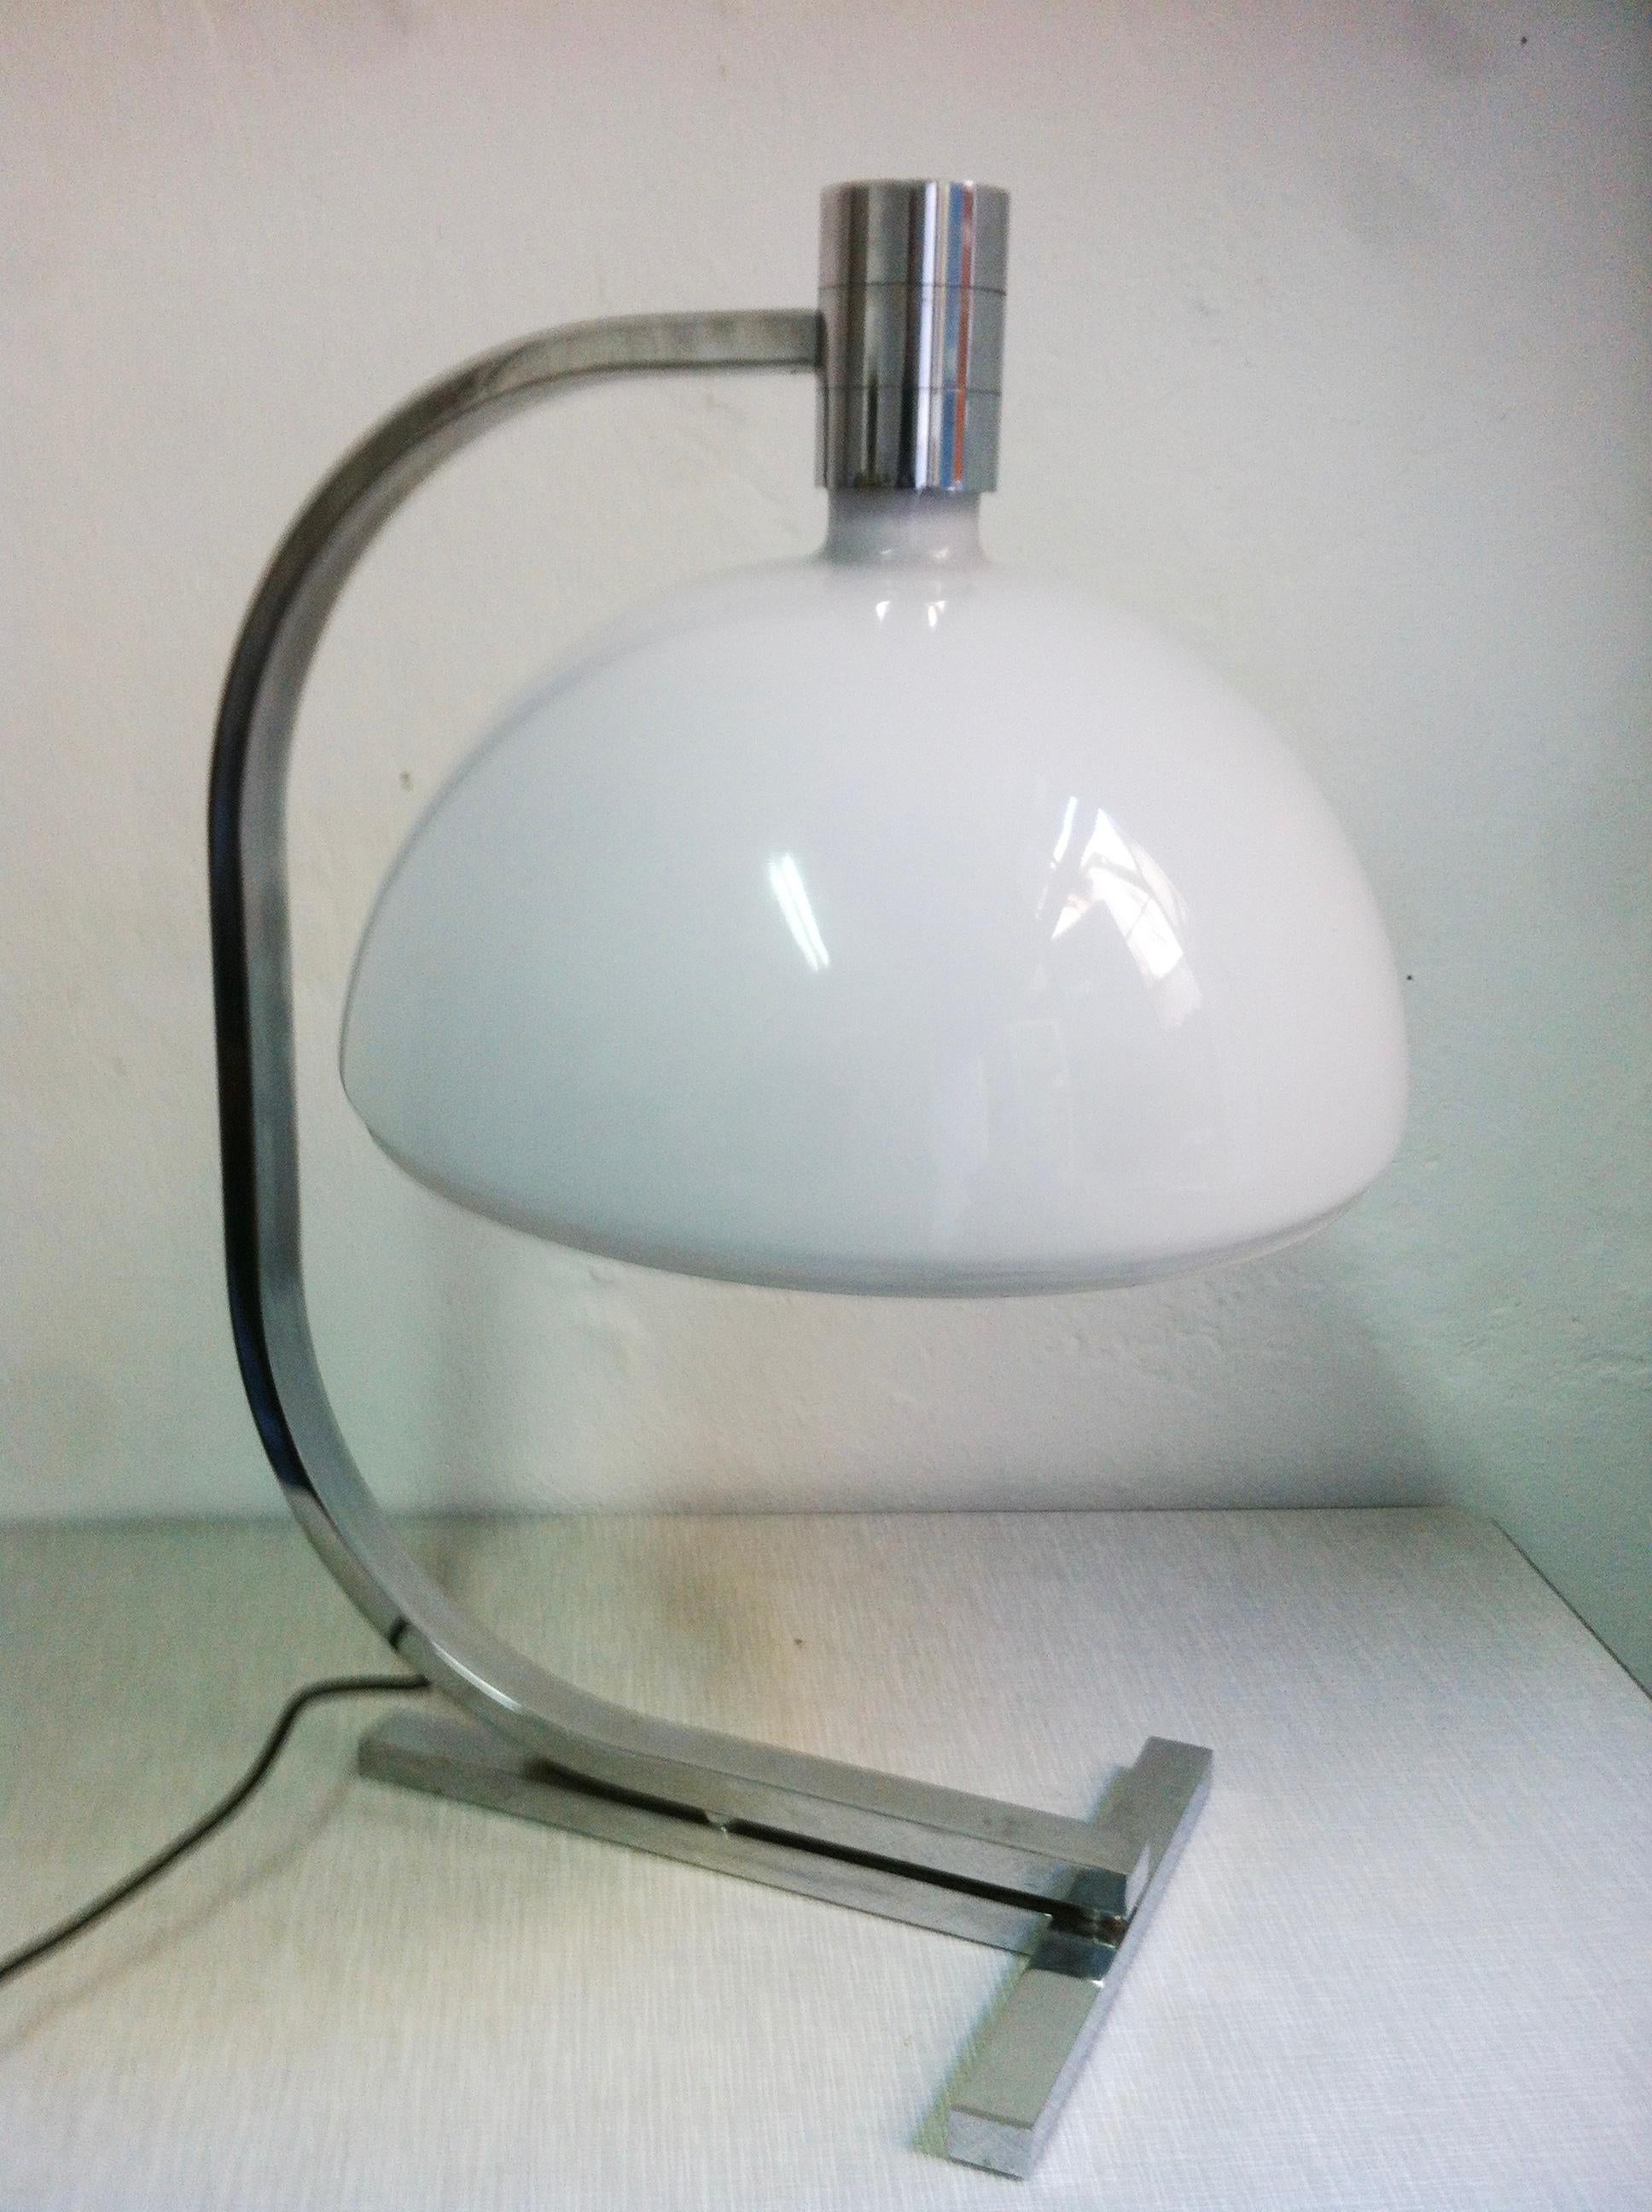 Italian Midcentury AM/AS Table Lamp by Helg, Piva, and Albini for Sirrah Large, 1969 For Sale